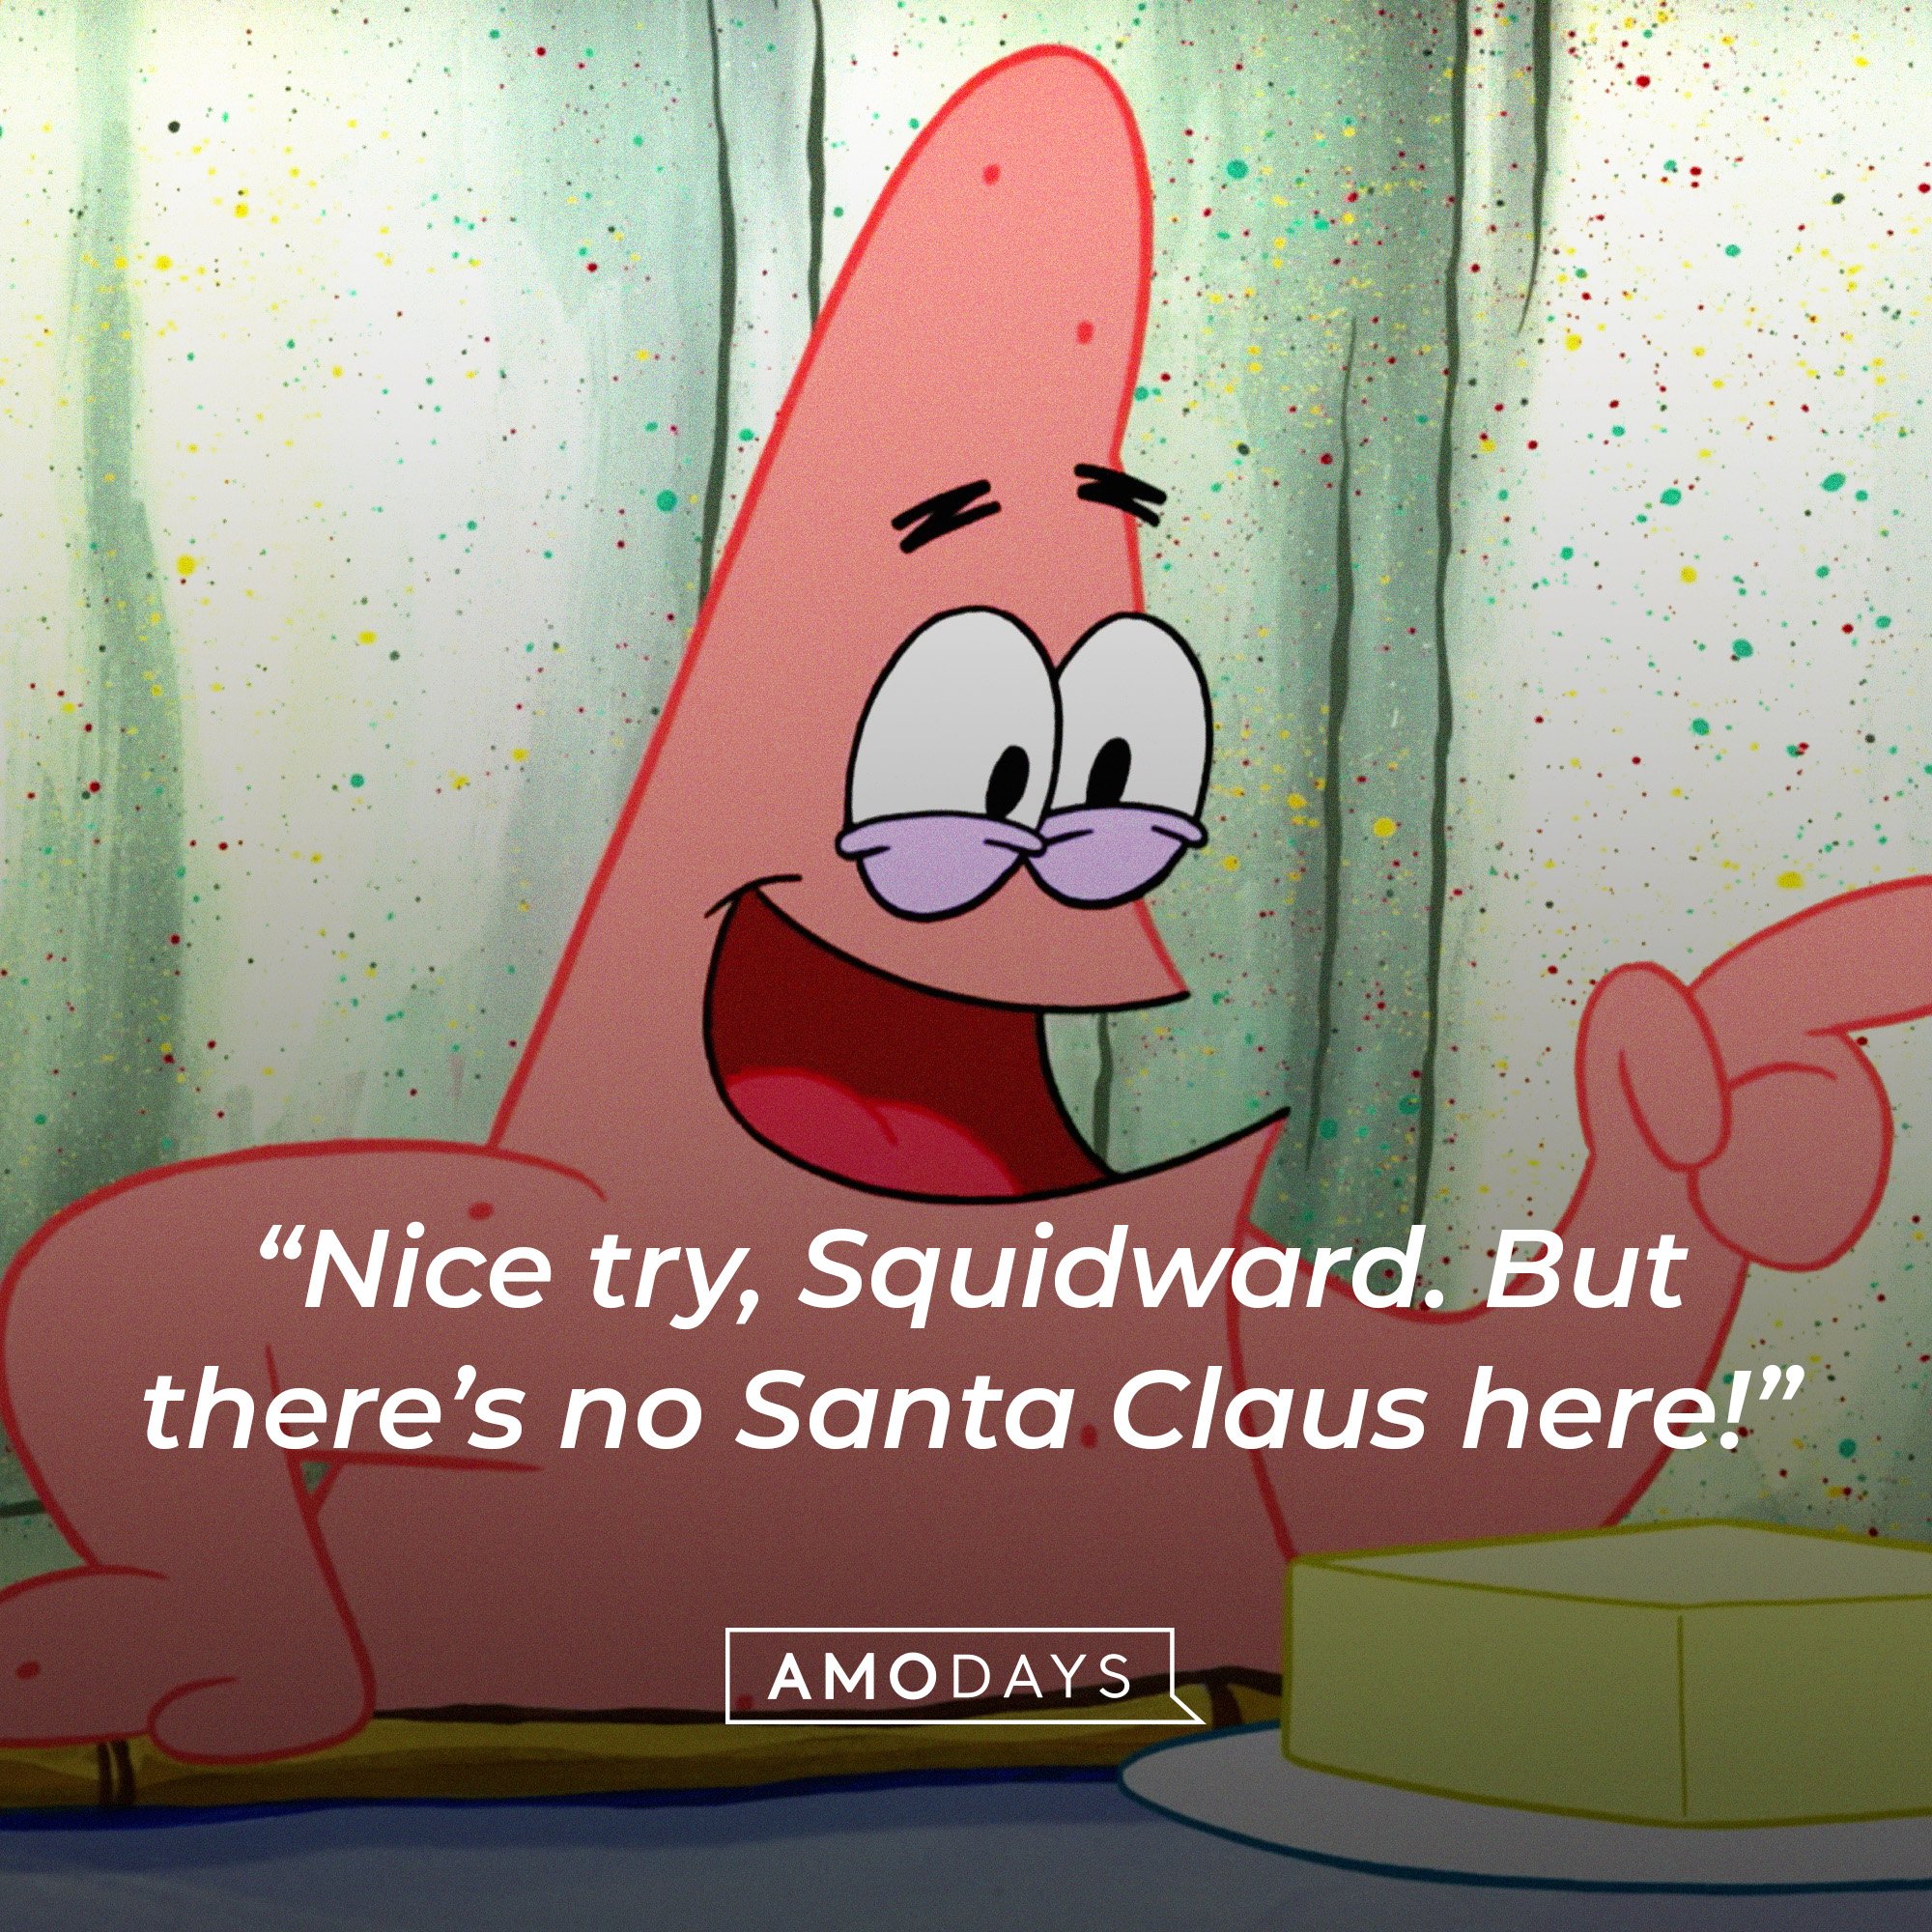 Patrick Star’s quote: “Nice try, Squidward. But there’s no Santa Claus here!” | Image: AmoDays